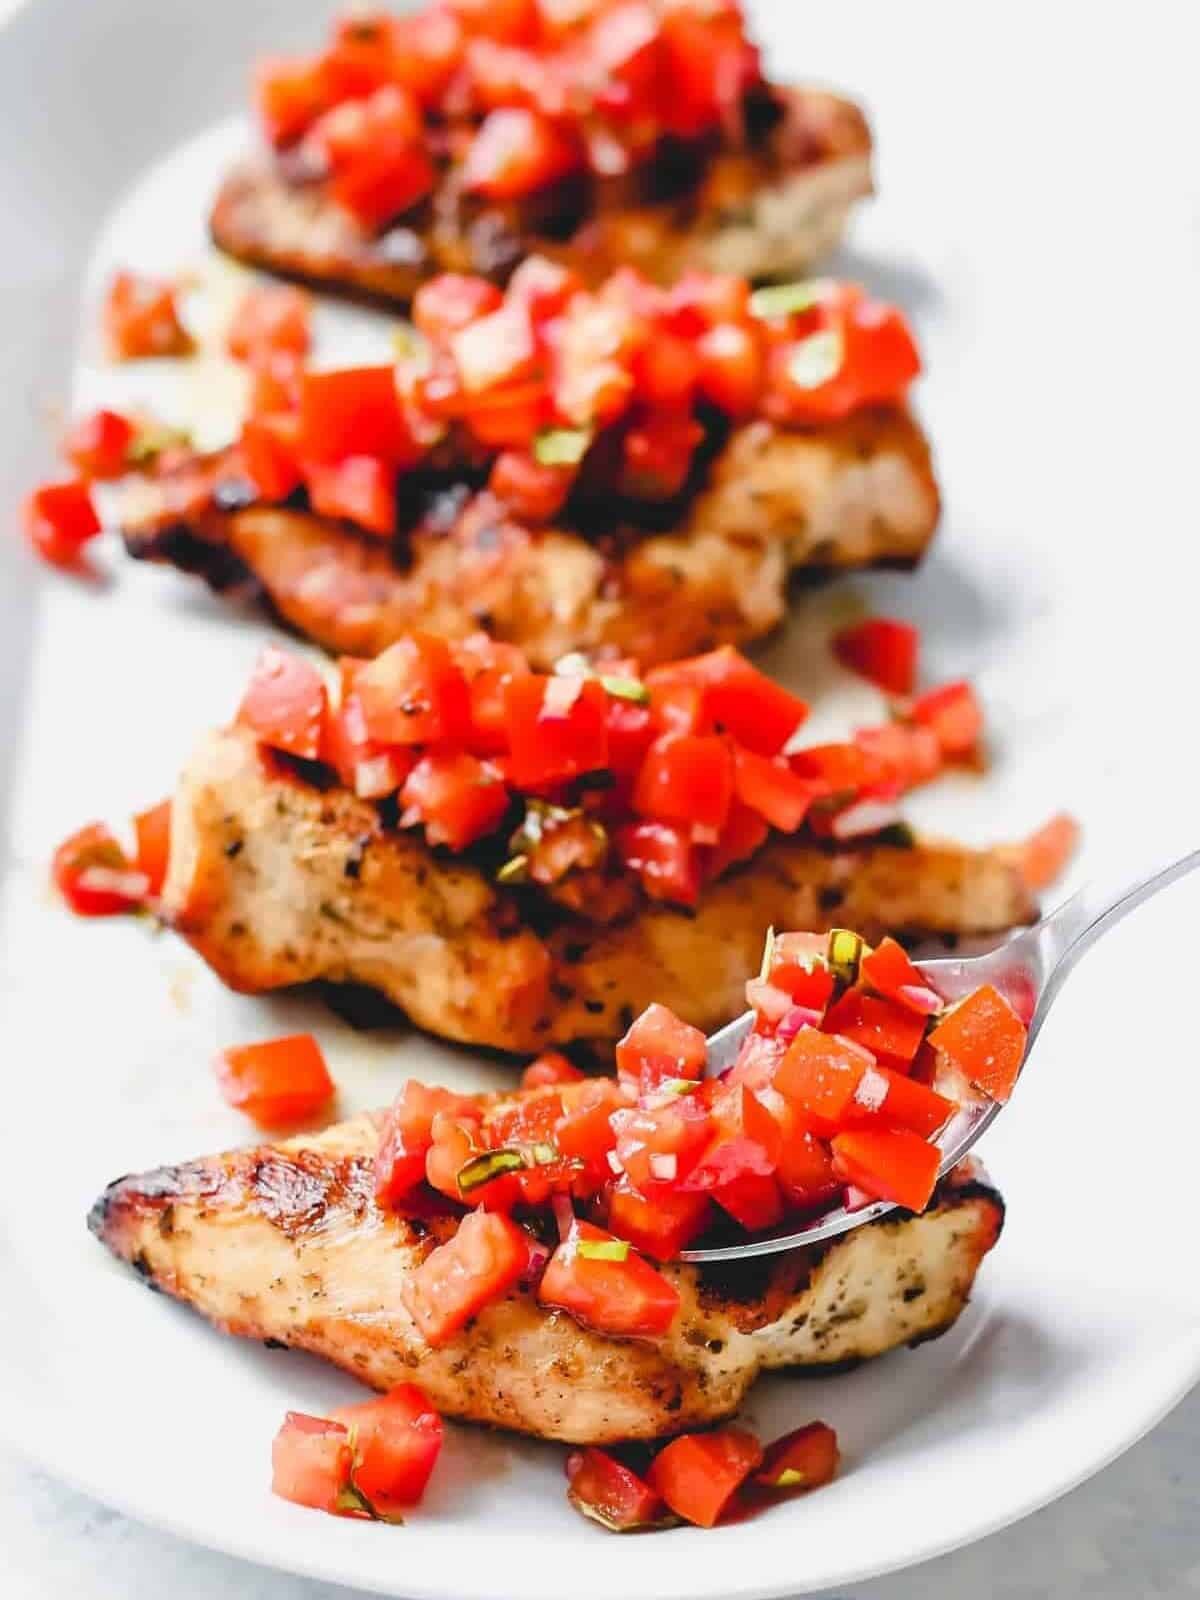 grilled chicken breasts with bruschetta topping on a serving plate